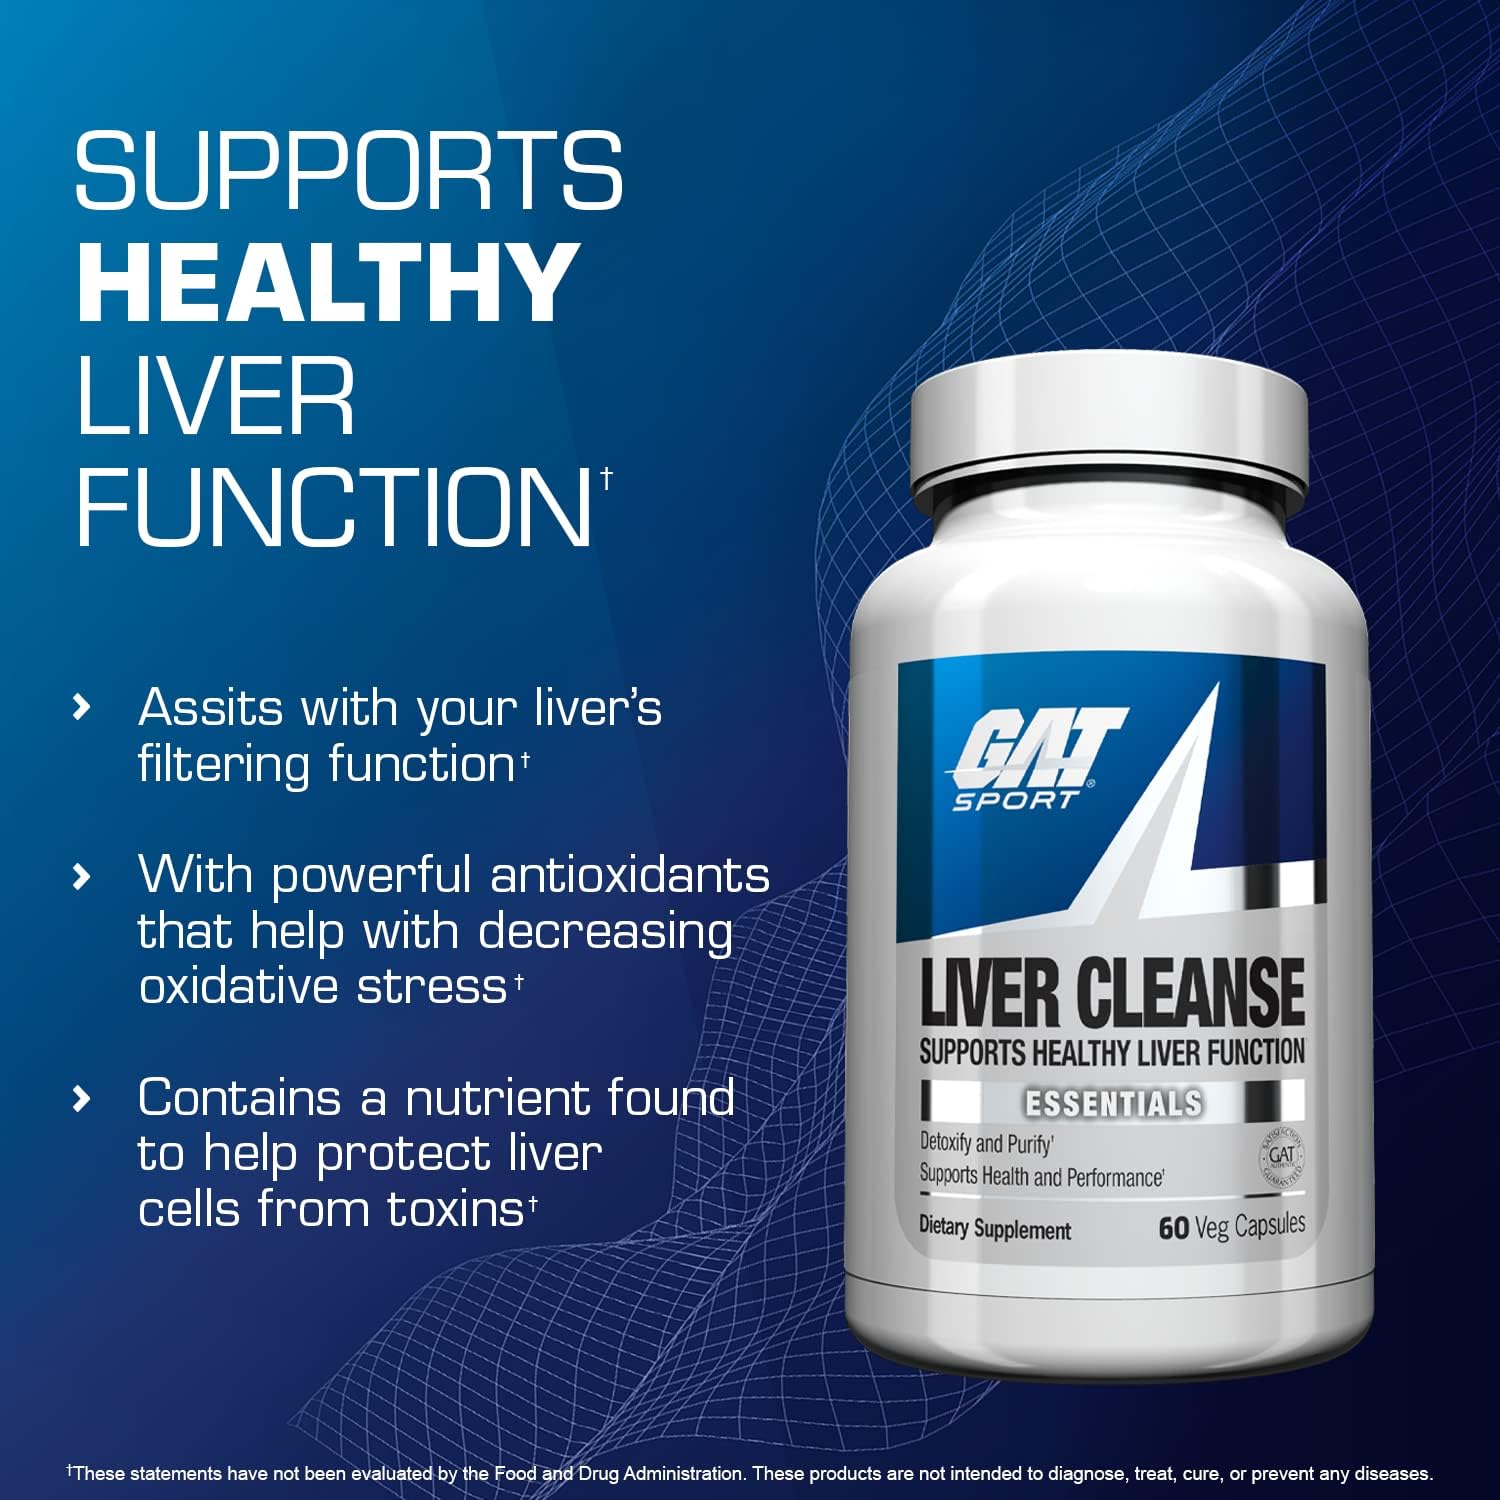 GAT Liver Cleanse (60 Vegetable Capsules)